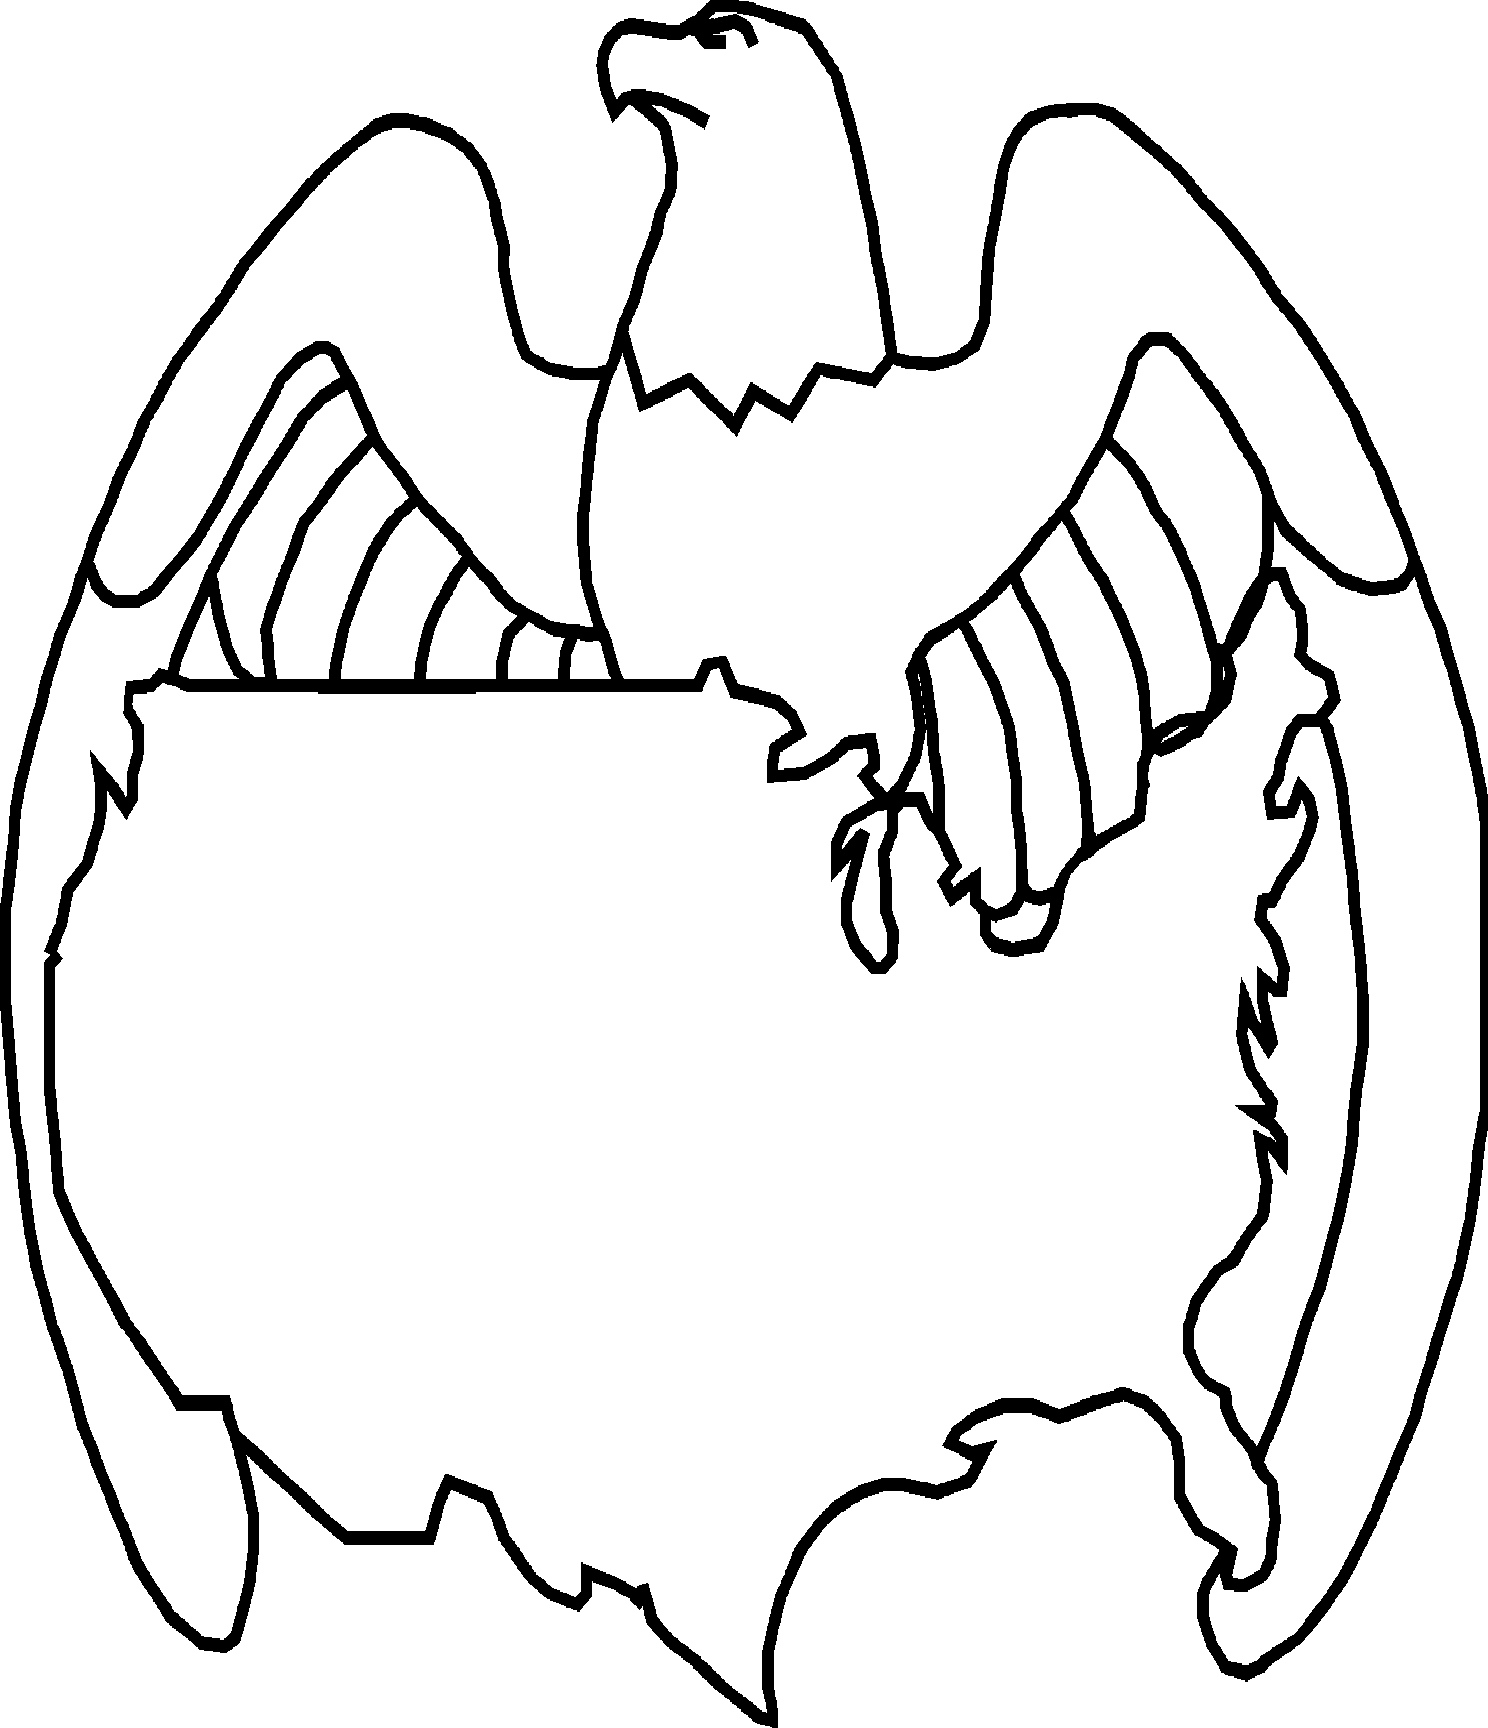 Free America Clipart Black And White, Download Free Clip Art.